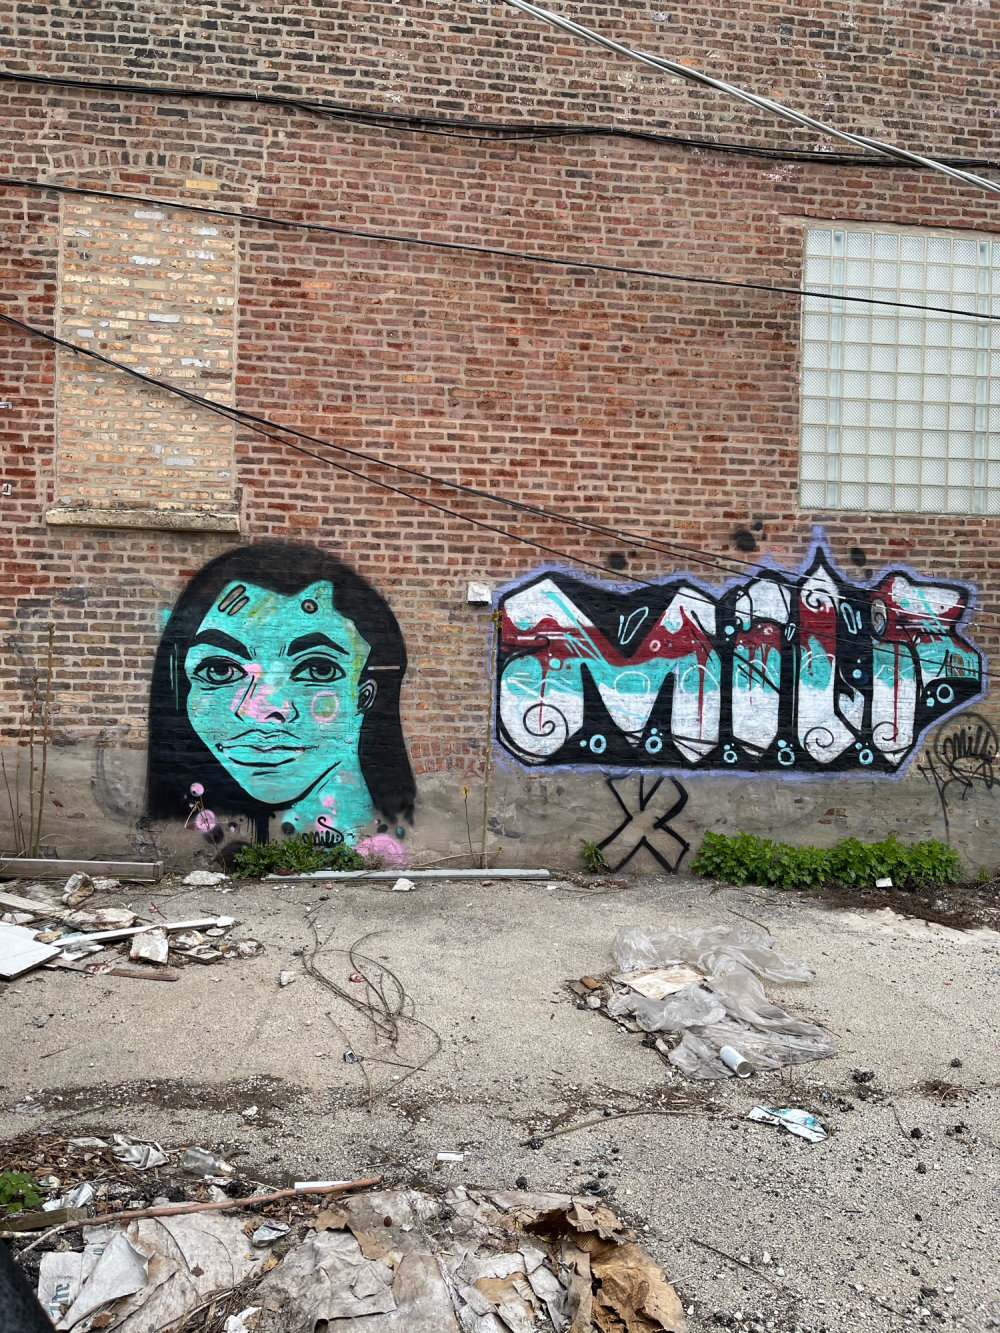 mural in Chicago by artist Erick Generic.